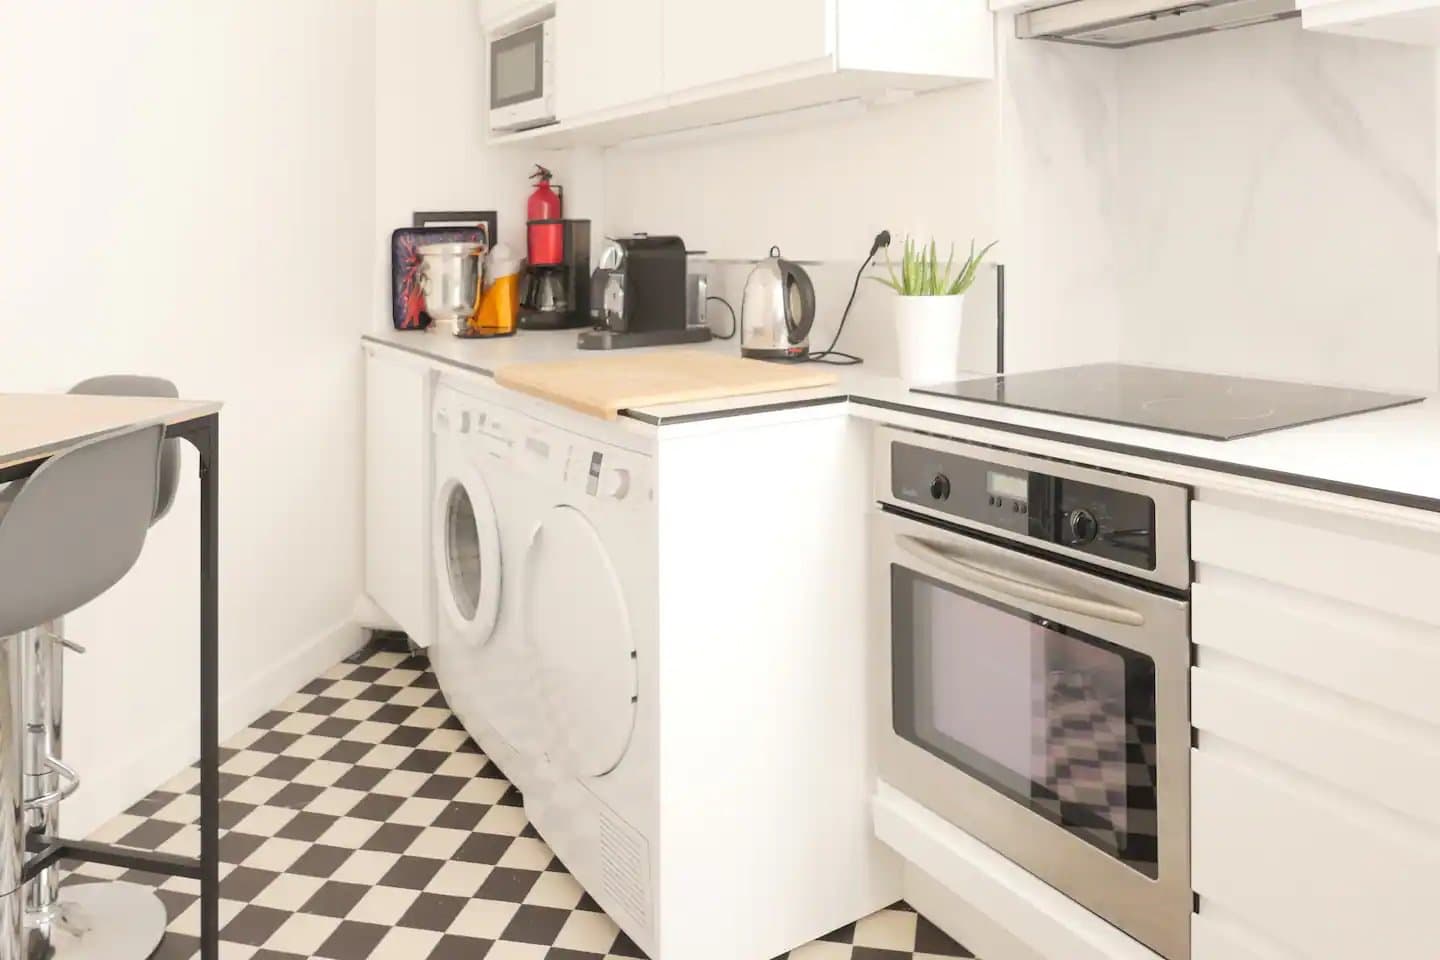 Horizontal photo of the kitchen/laundry in Renee's Air BnB apartment in Paris.